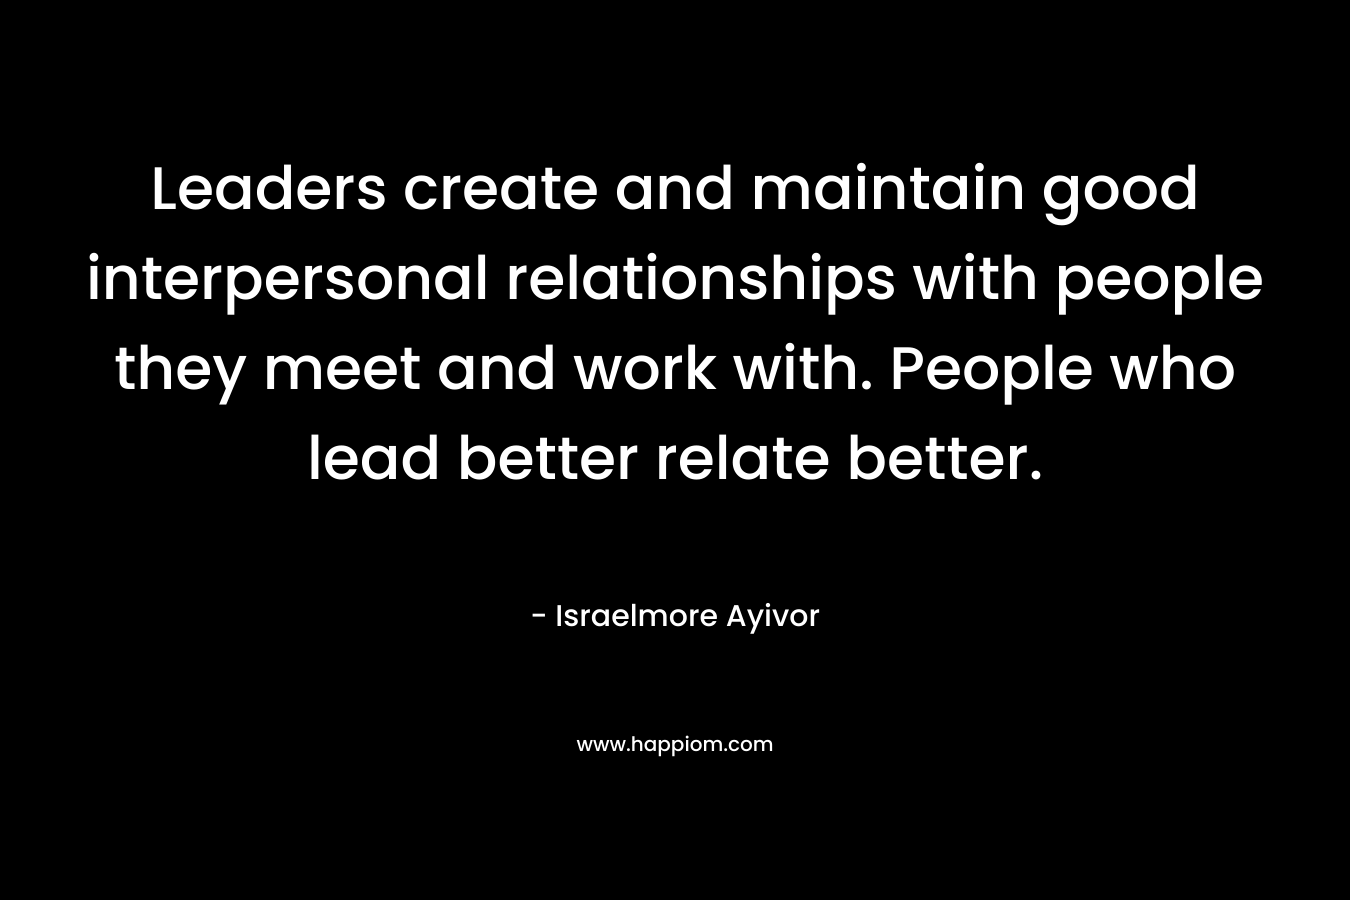 Leaders create and maintain good interpersonal relationships with people they meet and work with. People who lead better relate better.